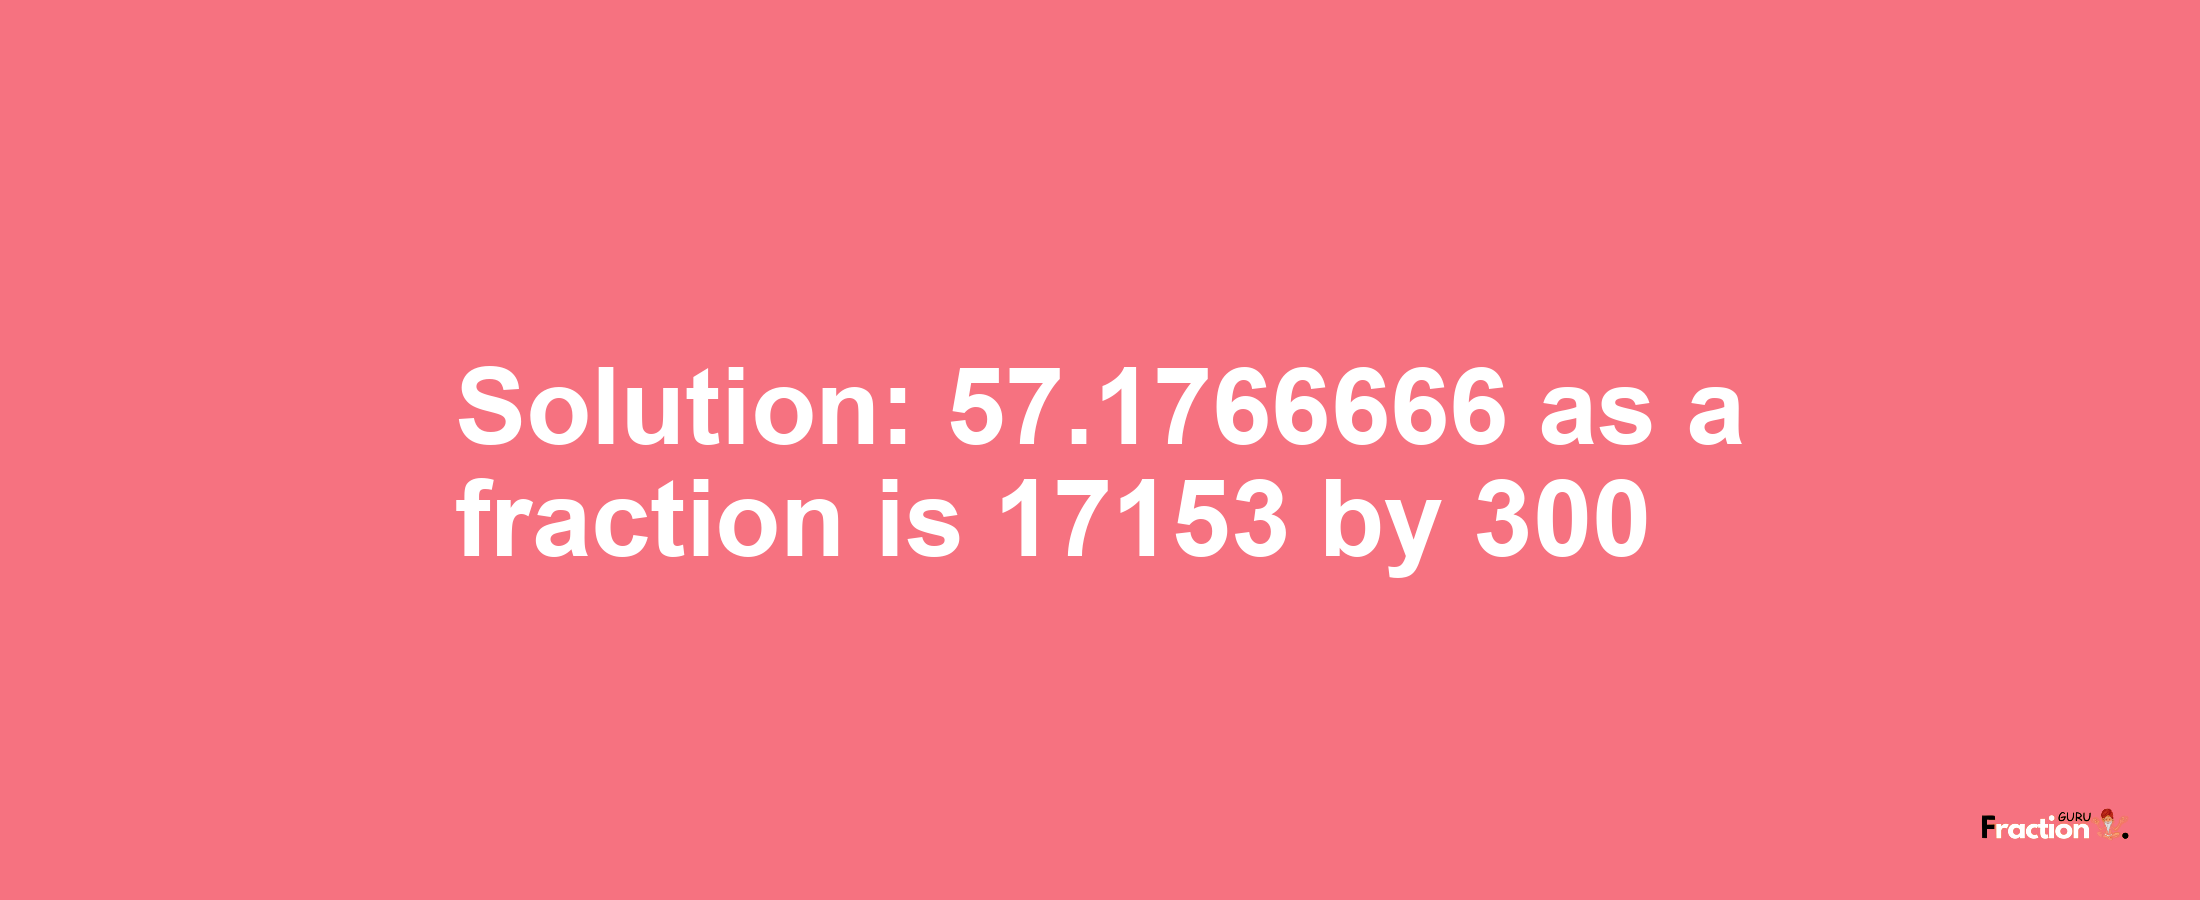 Solution:57.1766666 as a fraction is 17153/300